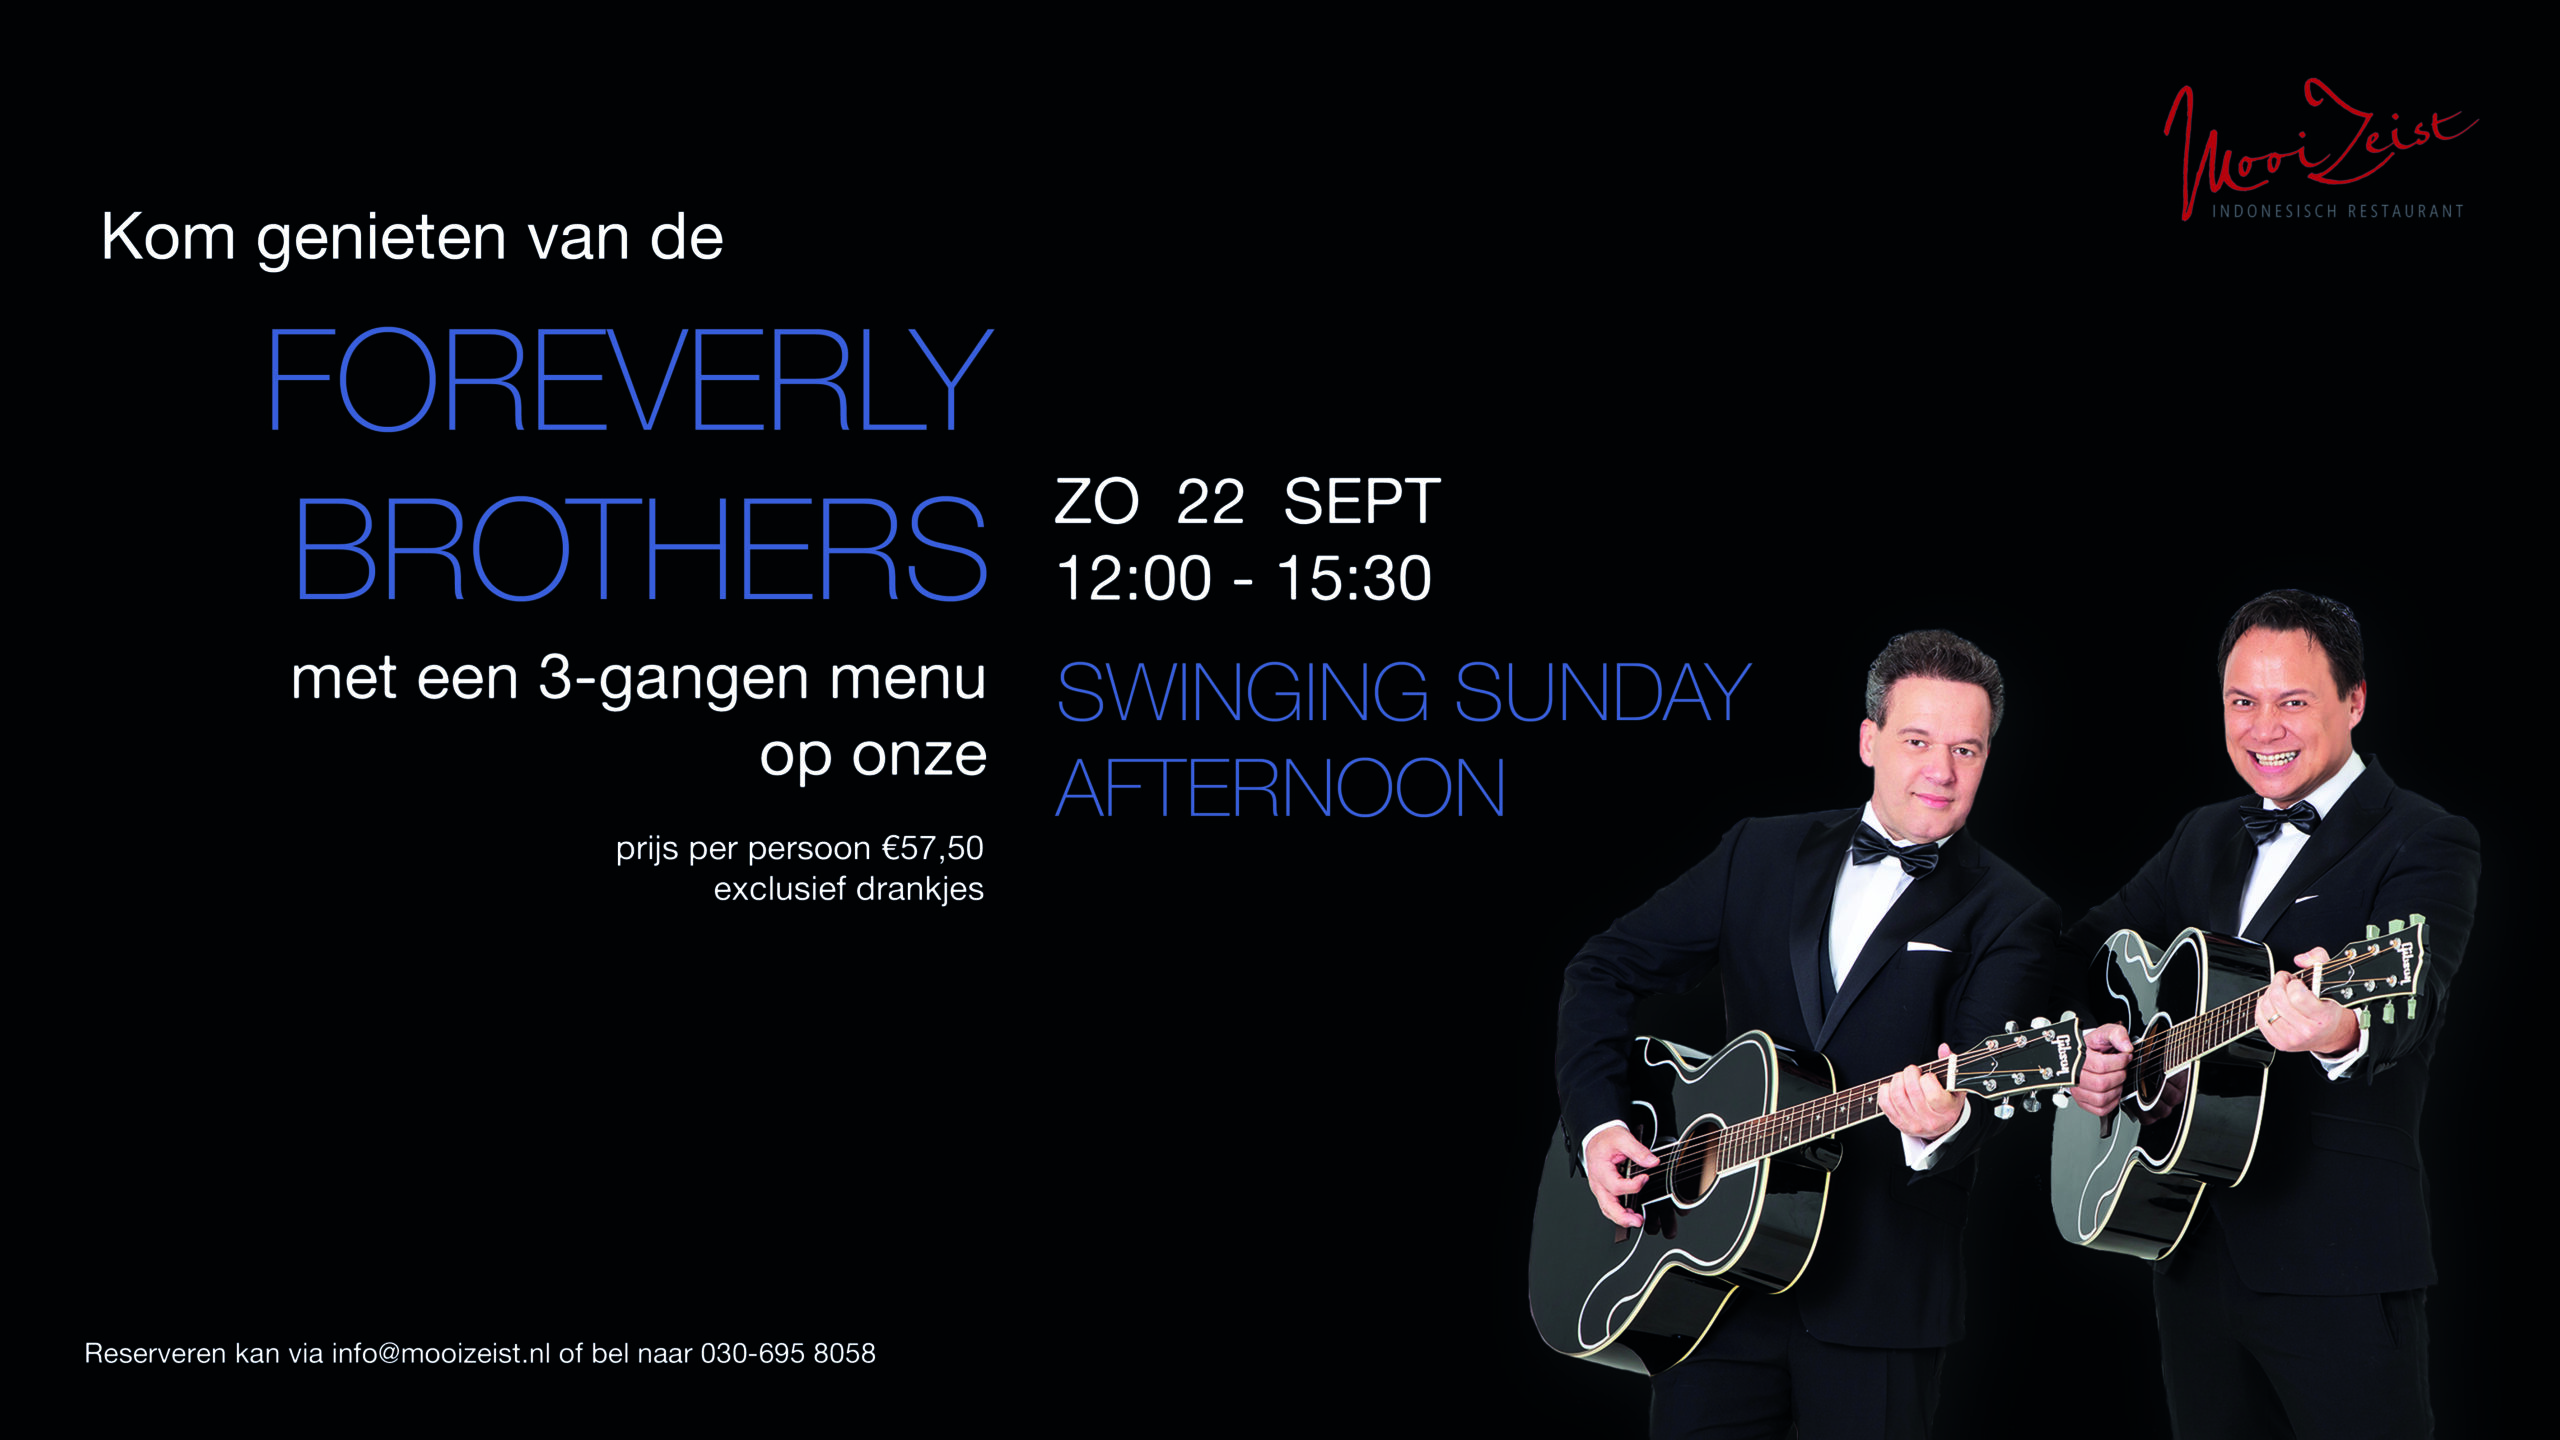 Swinging Sunday Afternoon lunch met de FOREVERLY BROTHERS! 22 september